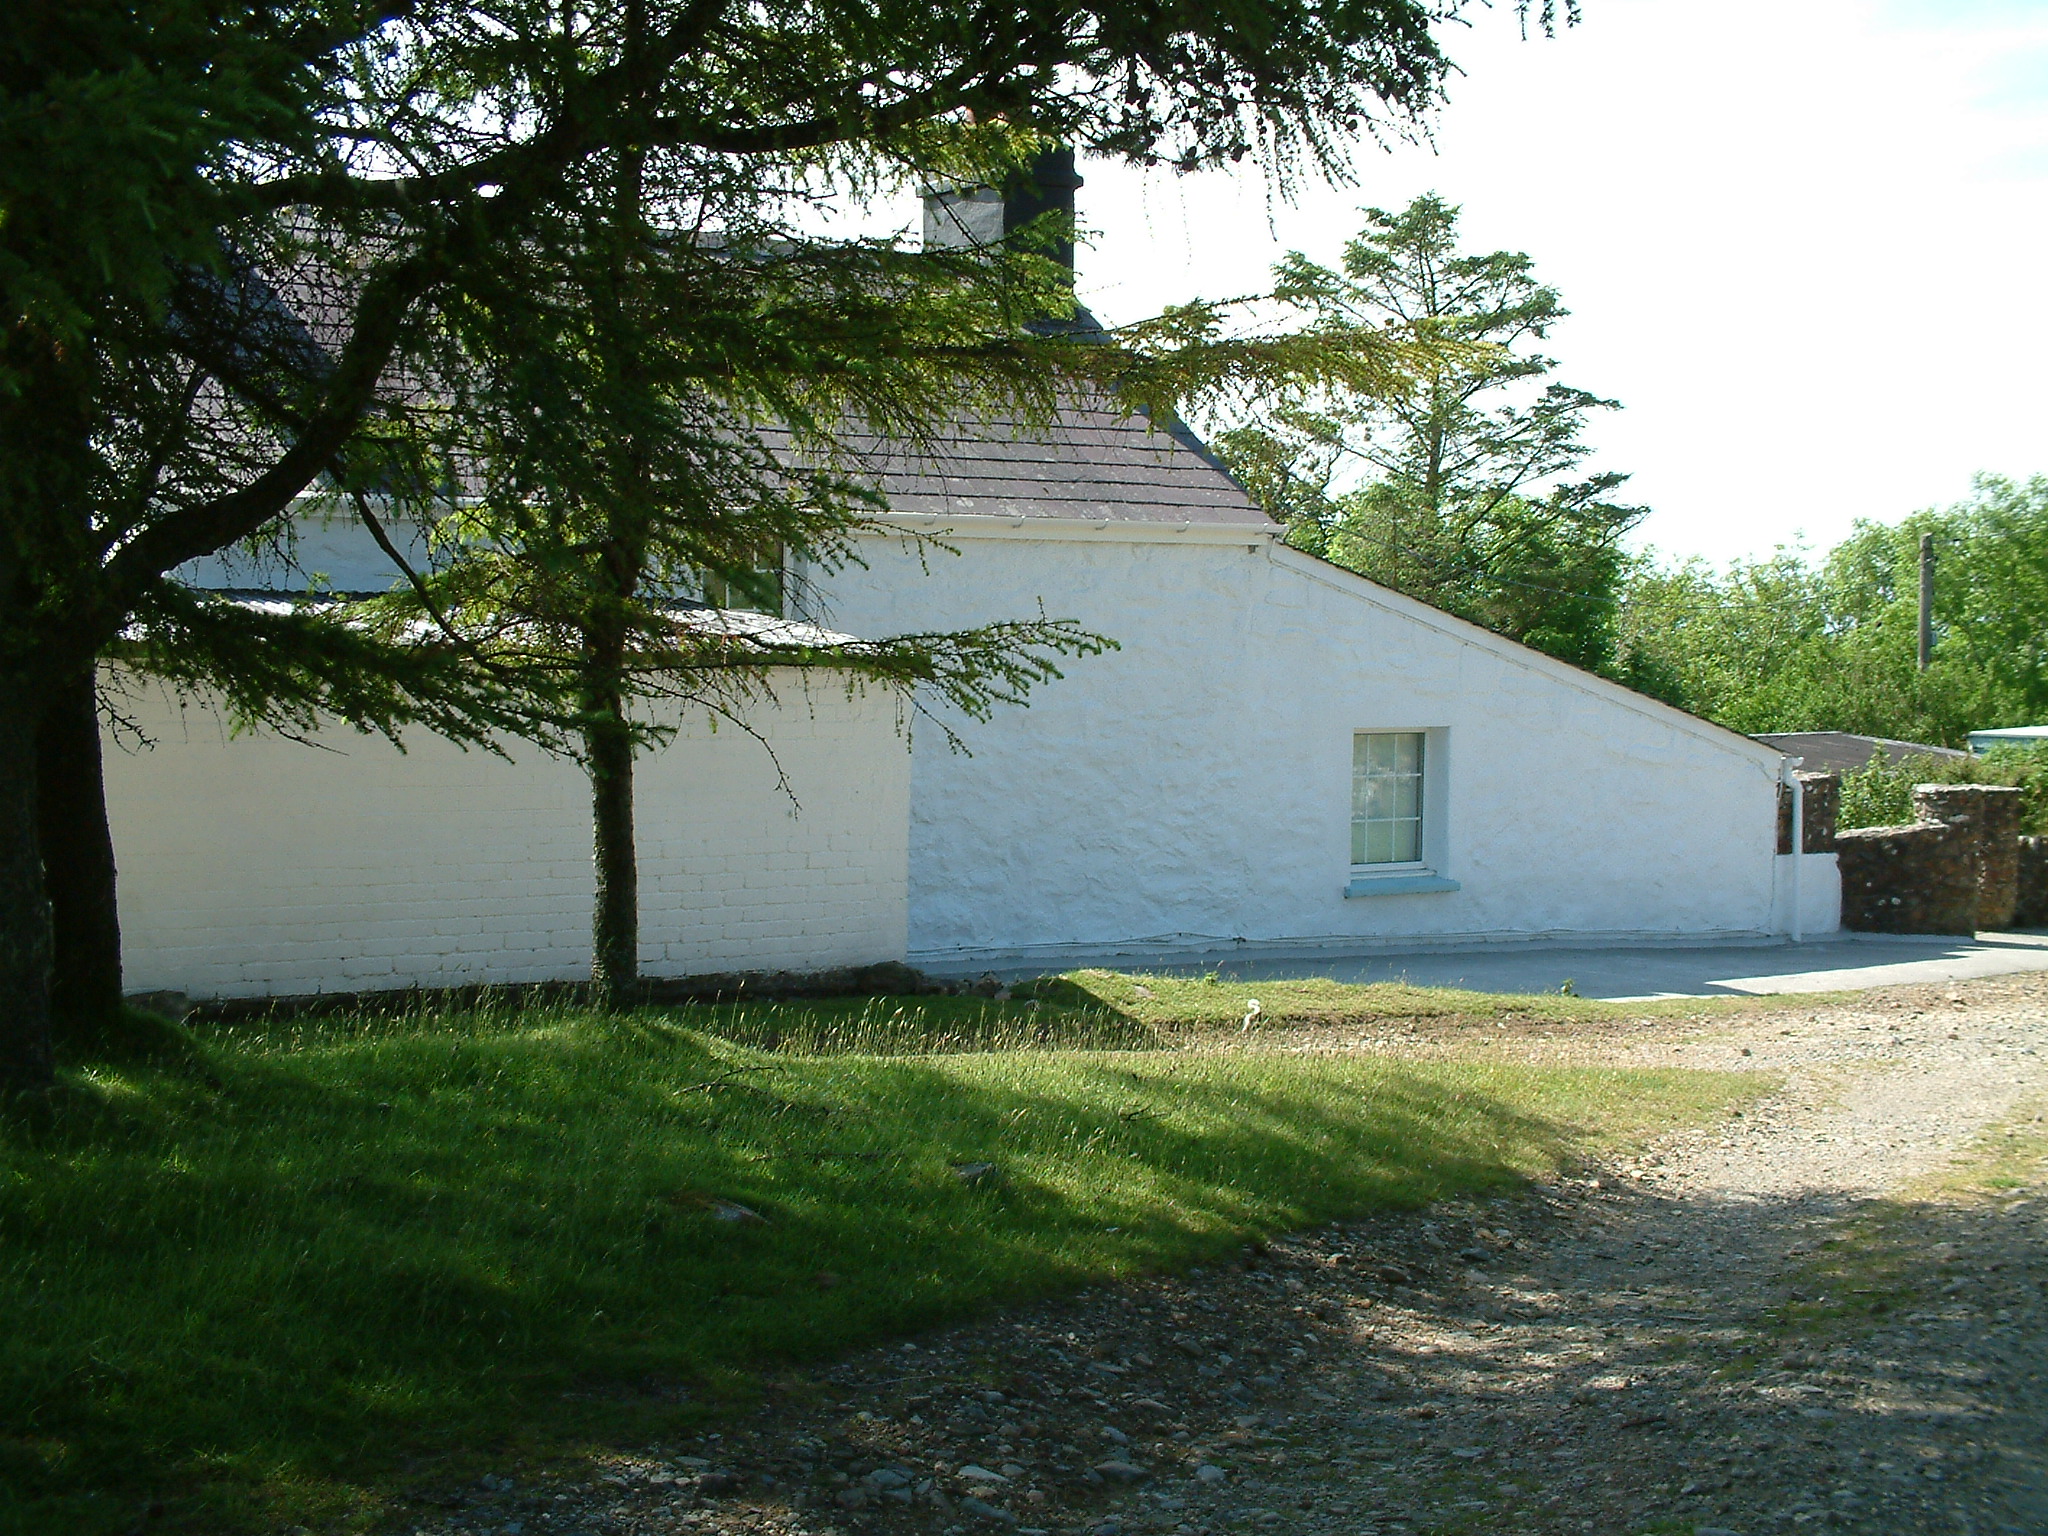 Rear of Gors-lwyd Cottage